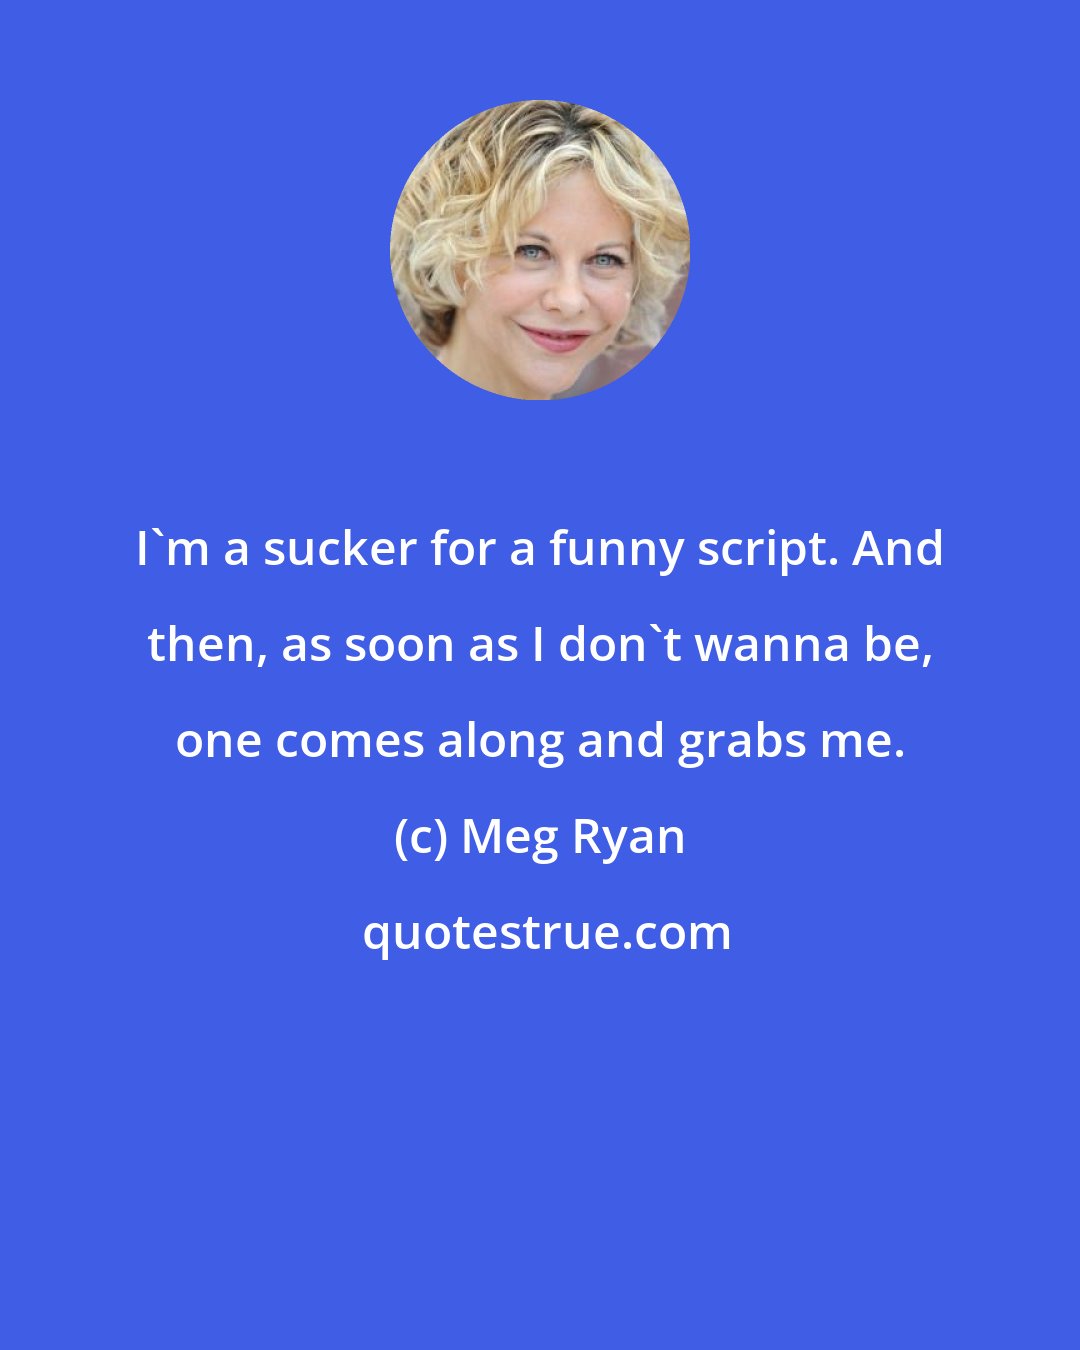 Meg Ryan: I'm a sucker for a funny script. And then, as soon as I don't wanna be, one comes along and grabs me.